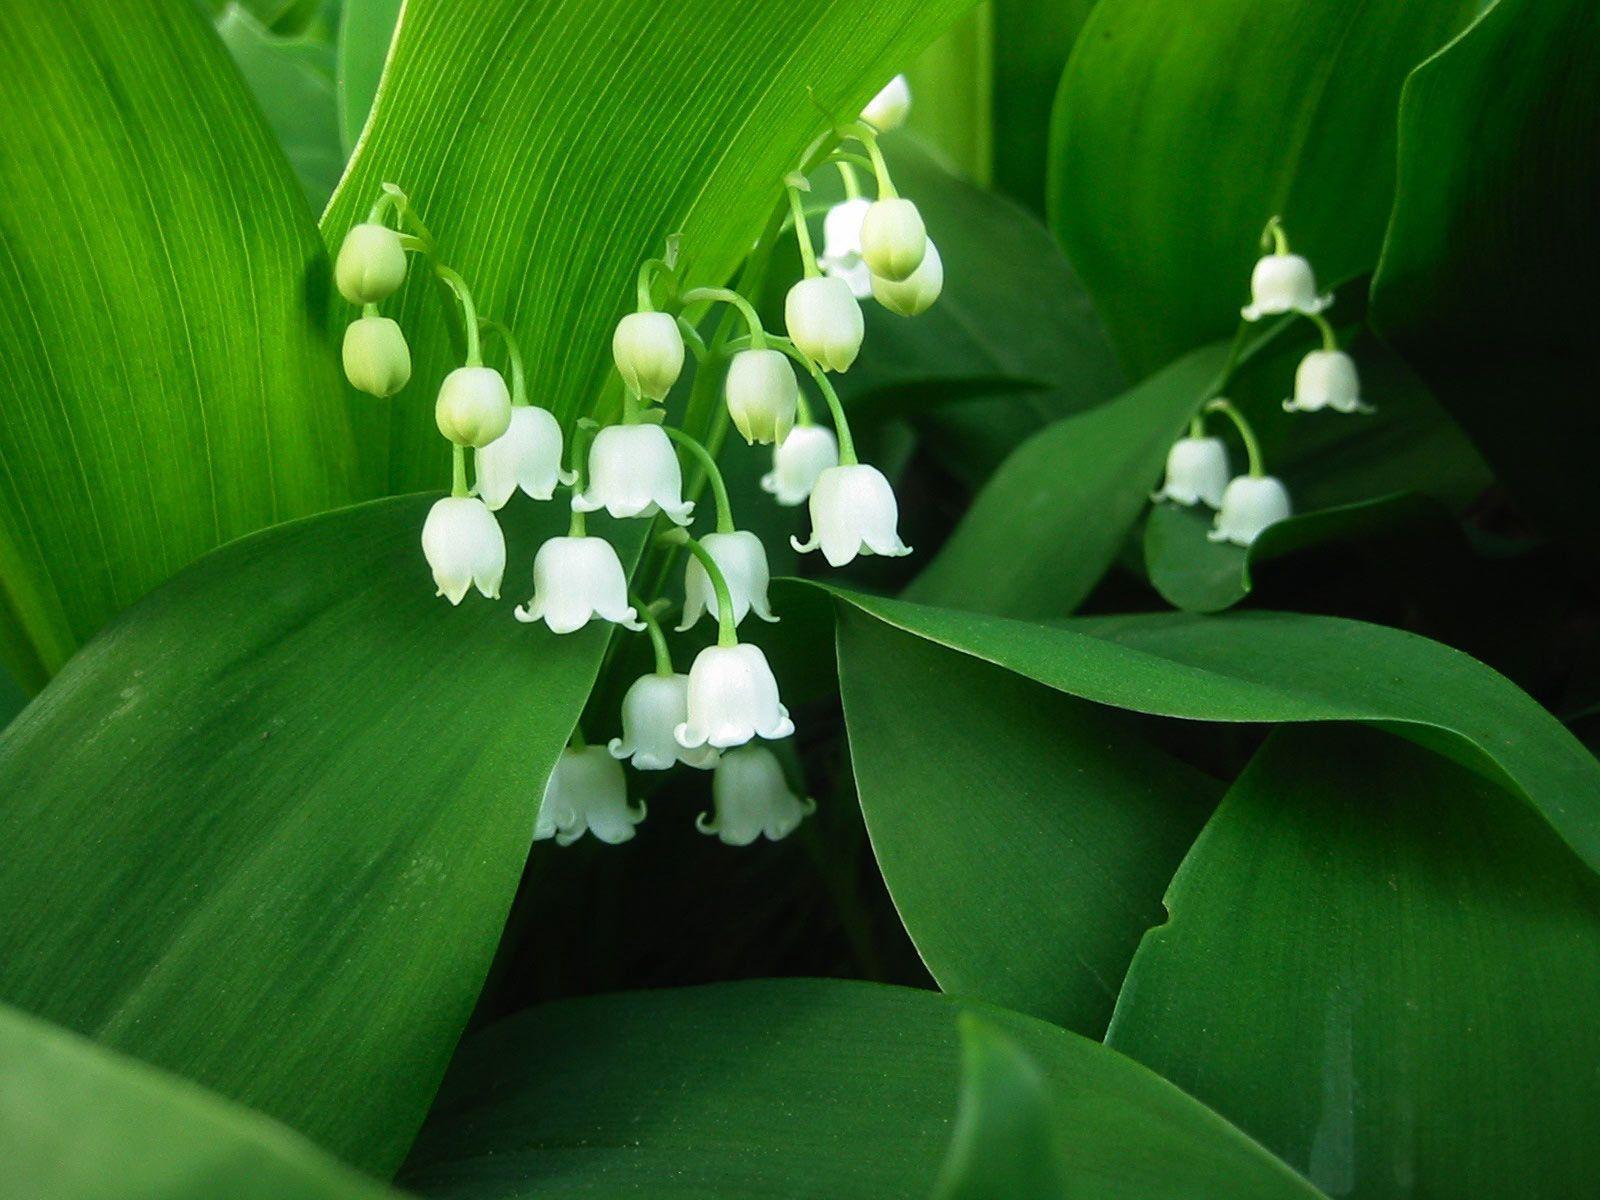 Desktop Wallpaper · Gallery · Nature · Lily of the valley